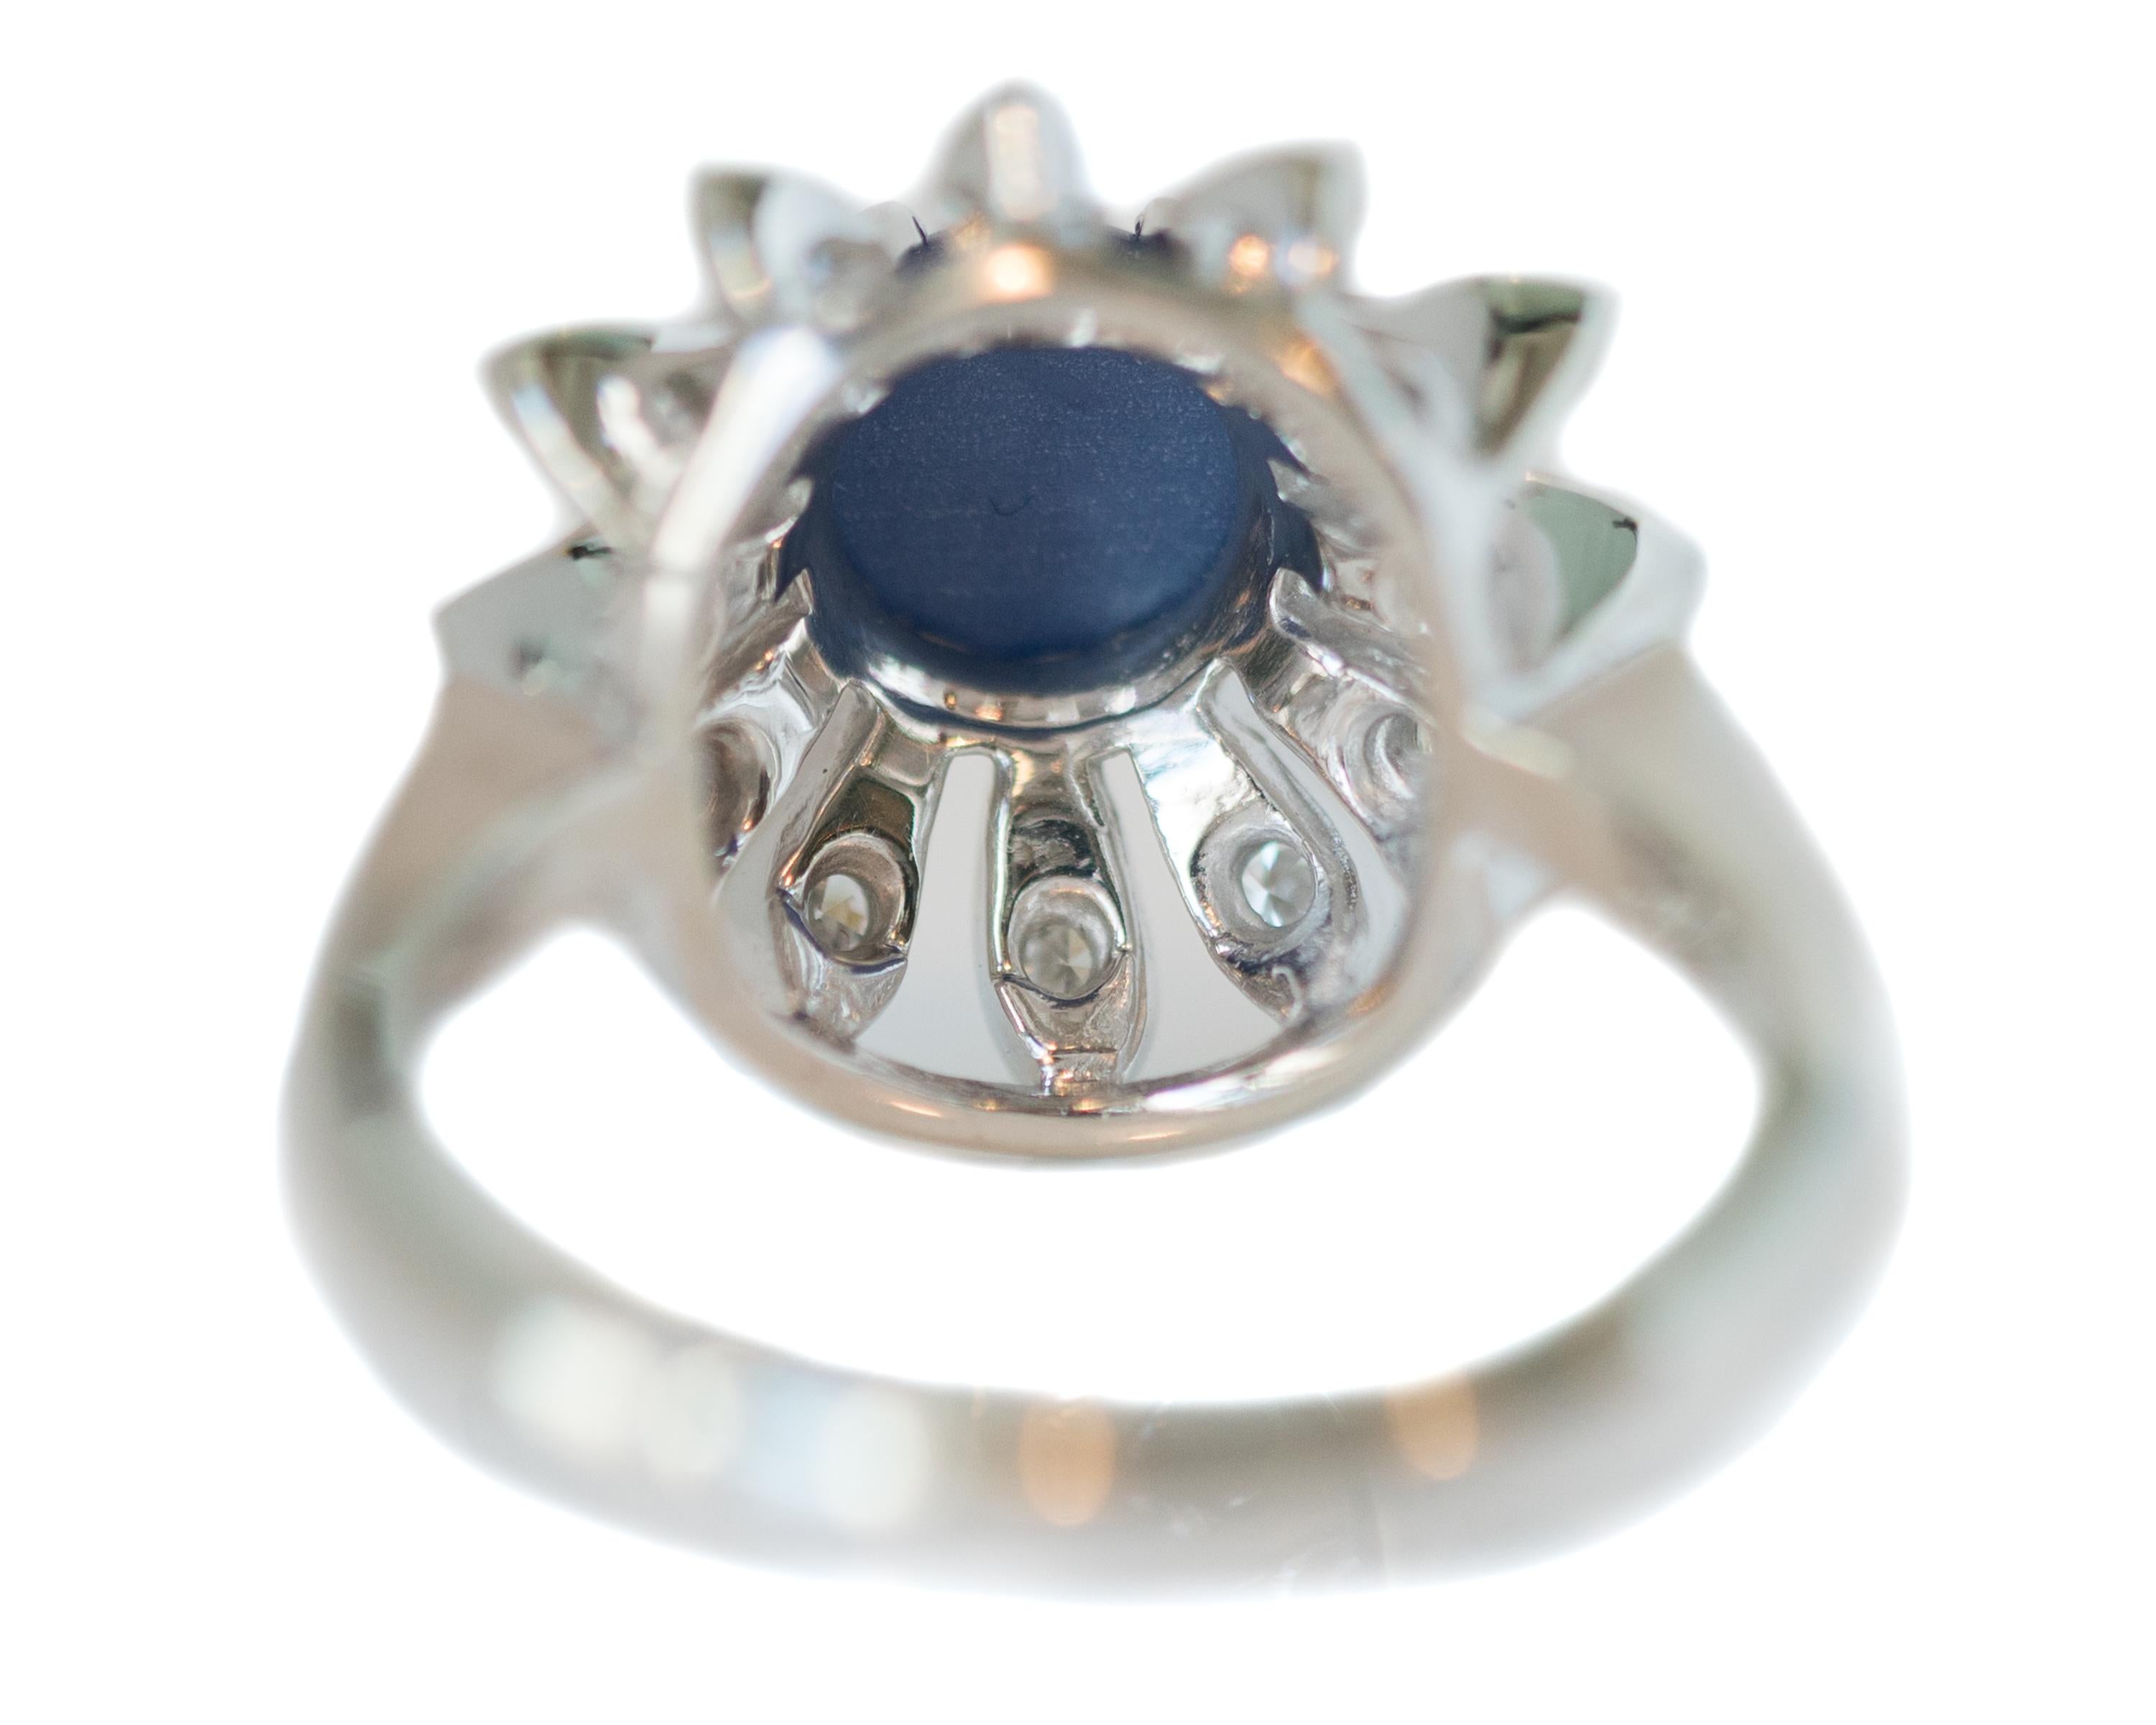 Retro 1950s 1 Carat Blue Star Sapphire, Diamond and 14 Karat White Gold Floral Ring For Sale